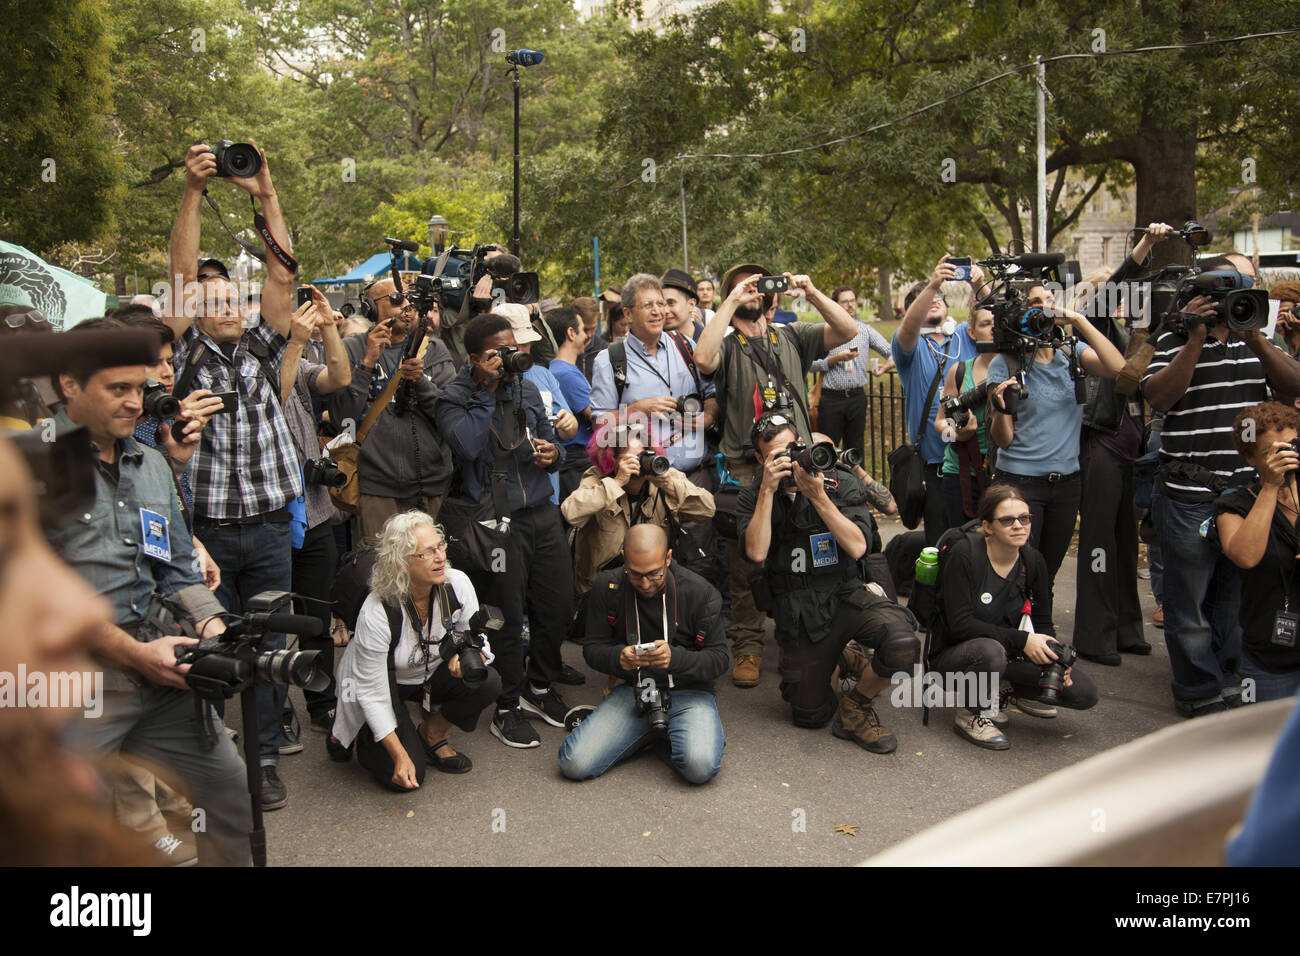 New York, USA. 22nd Sept. 2014. Climate Justice was the watch word today as protesters staged a sit-in in NYC's Financial District to protest against the criminality of 'Wall Street' in supporting corporations that are destroying the planet. Credit:  David Grossman/Alamy Live News Stock Photo